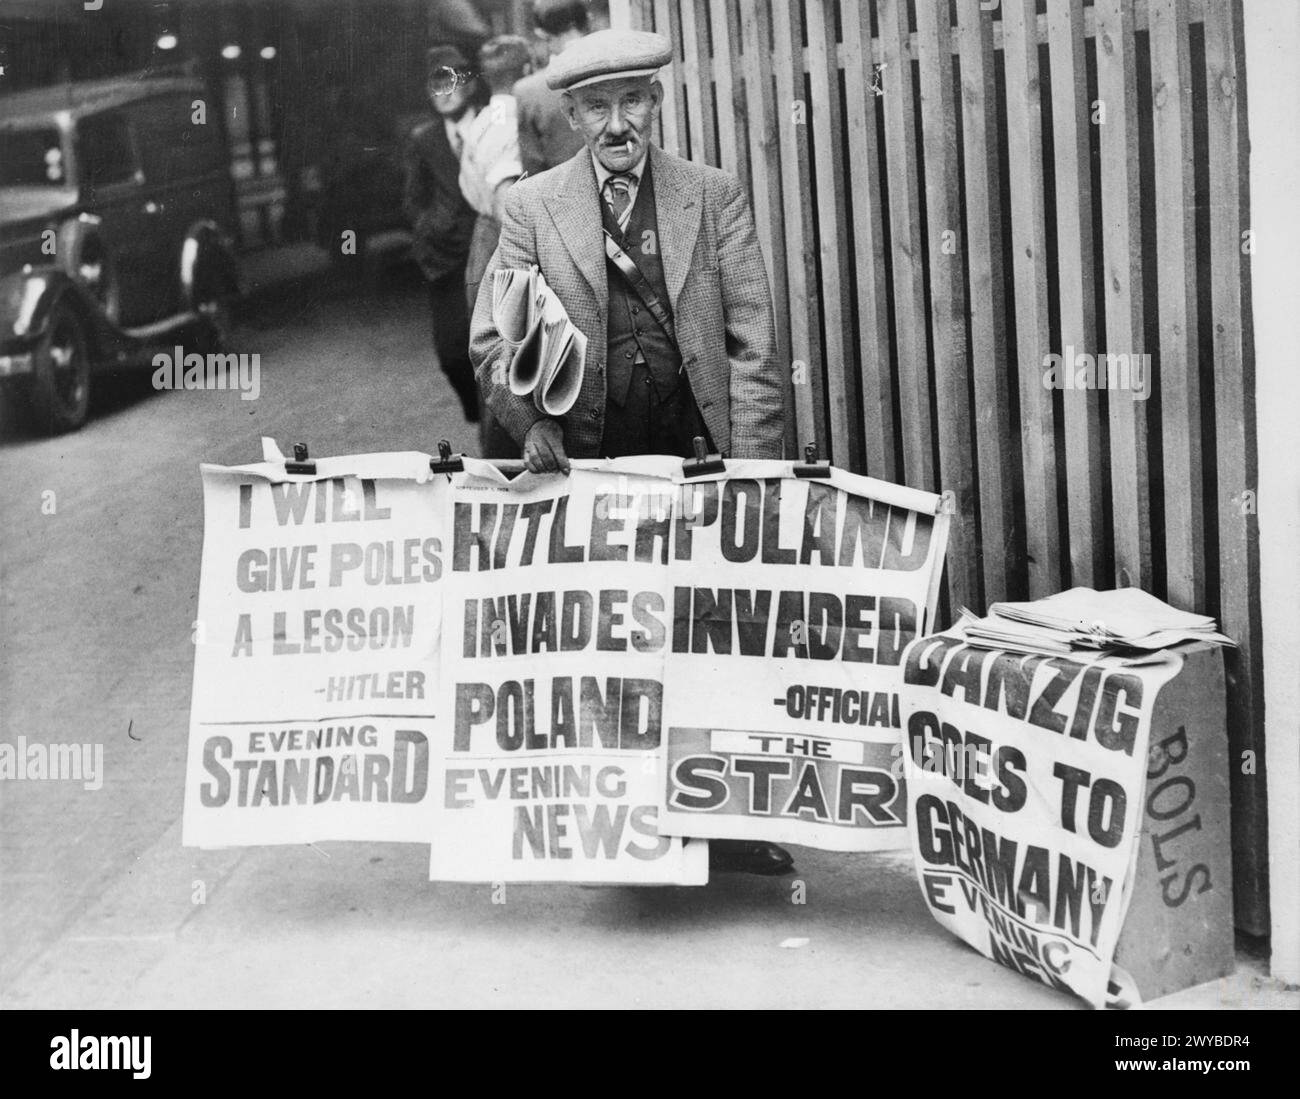 THE OUTBREAK OF THE SECOND WORLD WAR, 1 SEPTEMBER 1939 - Evening newspaper placards in London announce the news of Germany's invasion of Poland on 1 September 1939. , Stock Photo